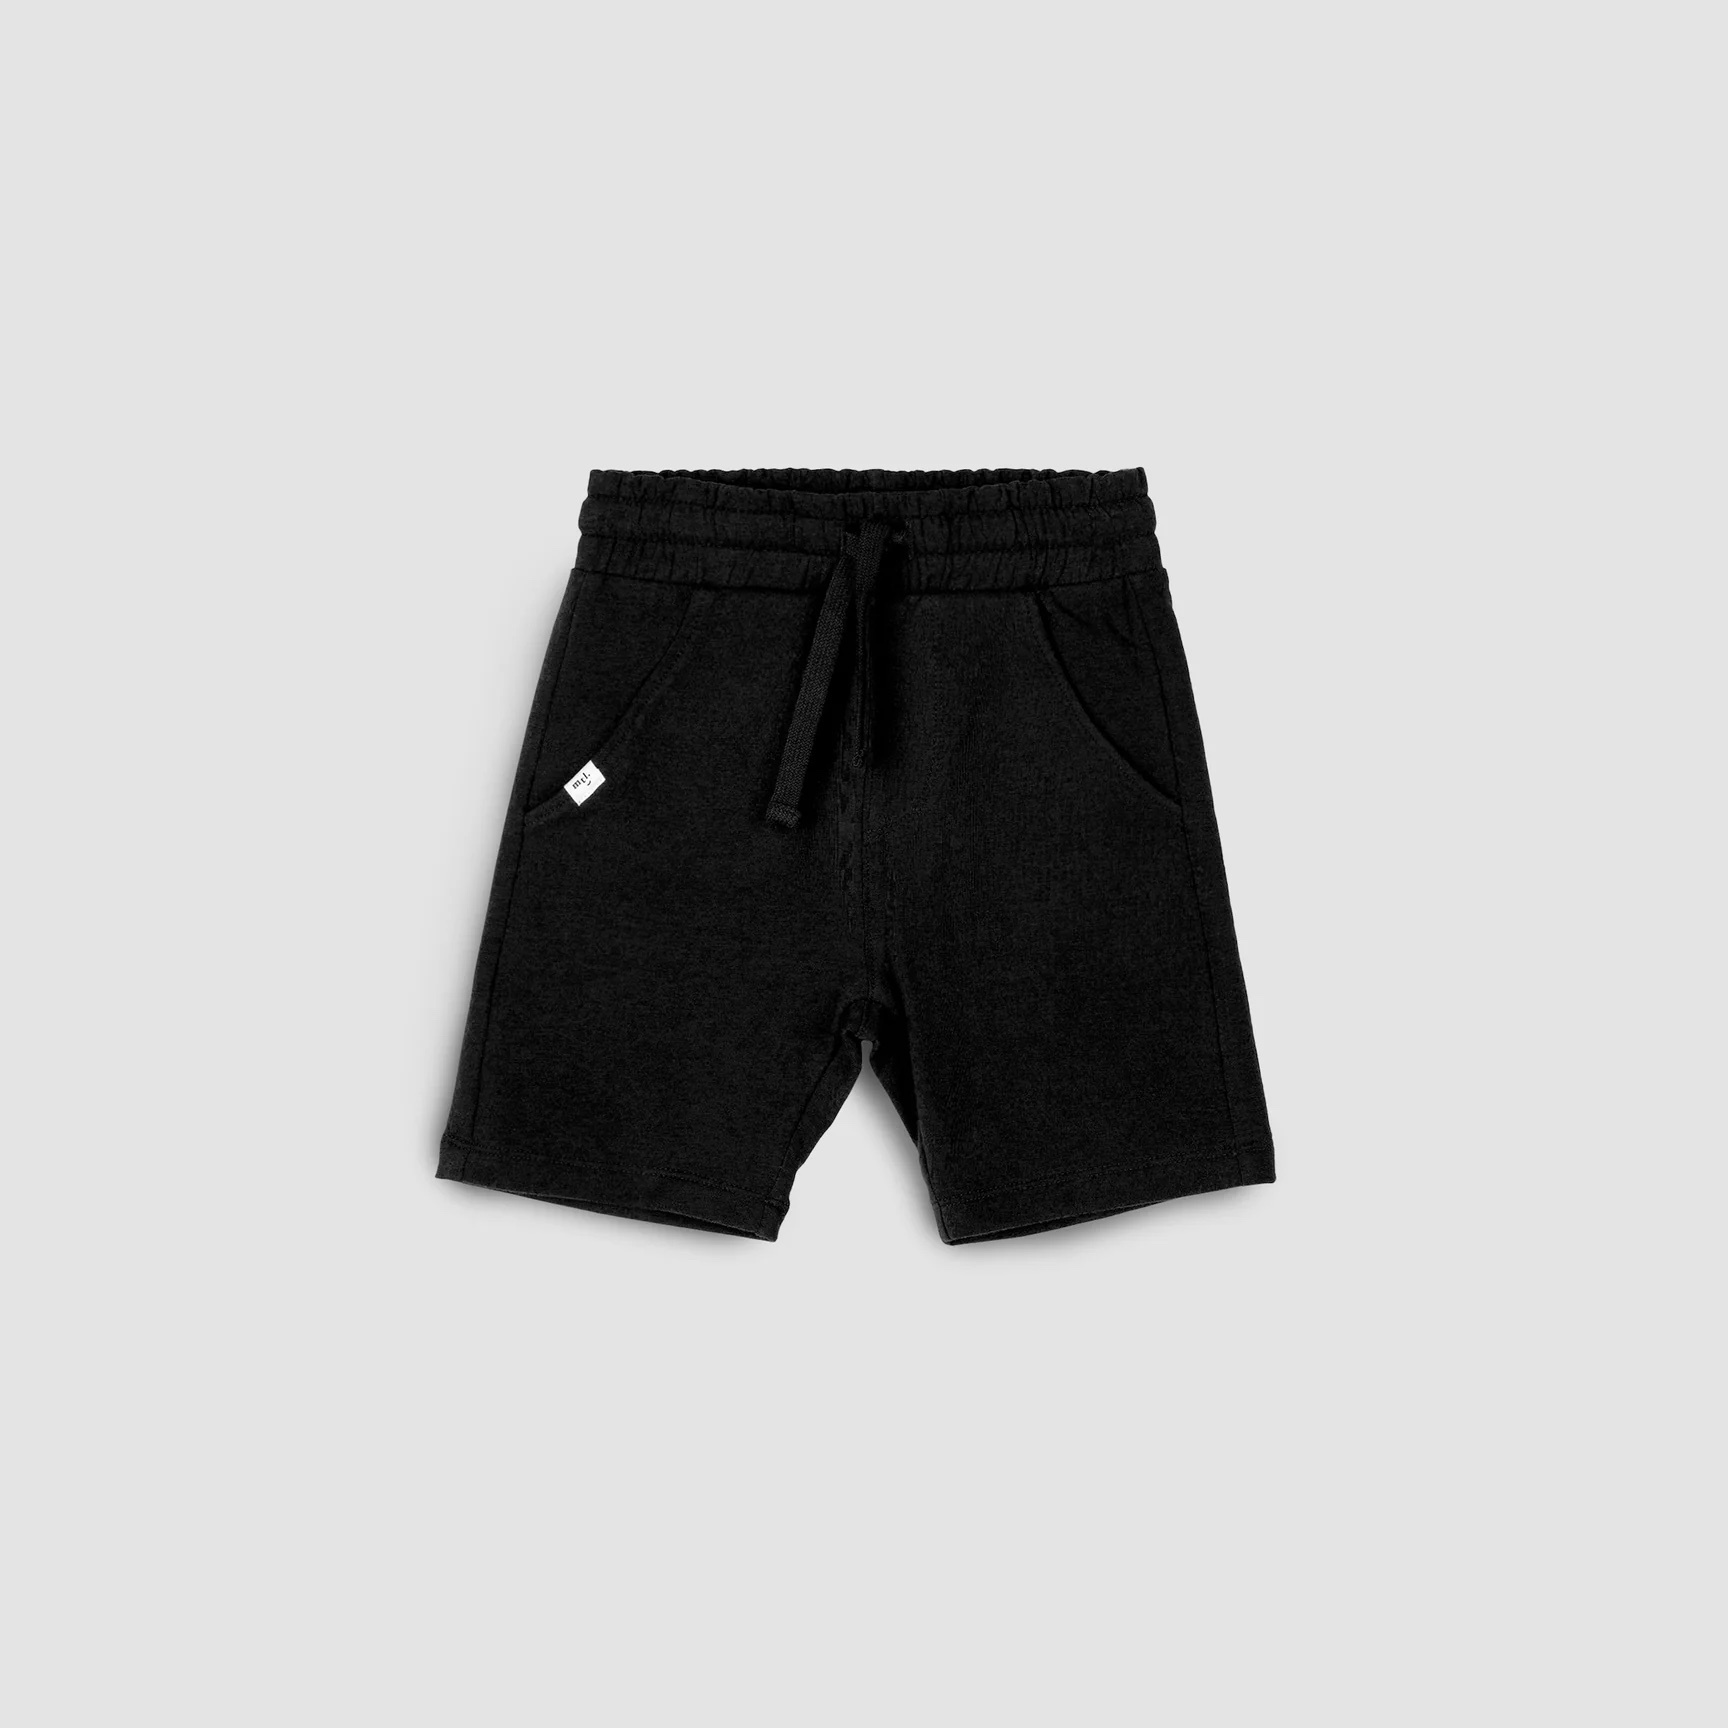 Miles the Label Miles Basic Terry Shorts